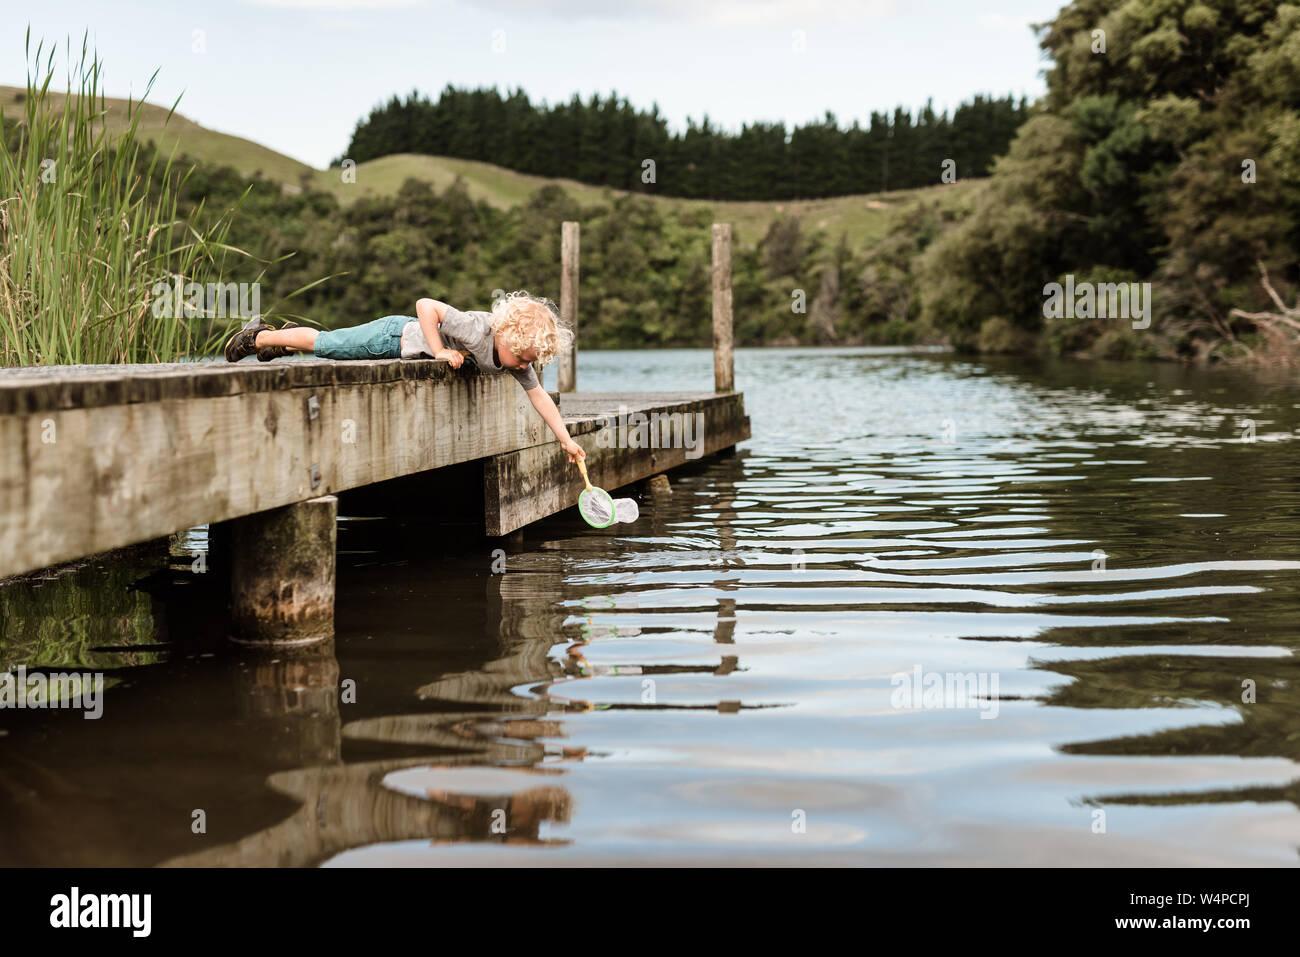 Young child reaching into a pond with a net Stock Photo